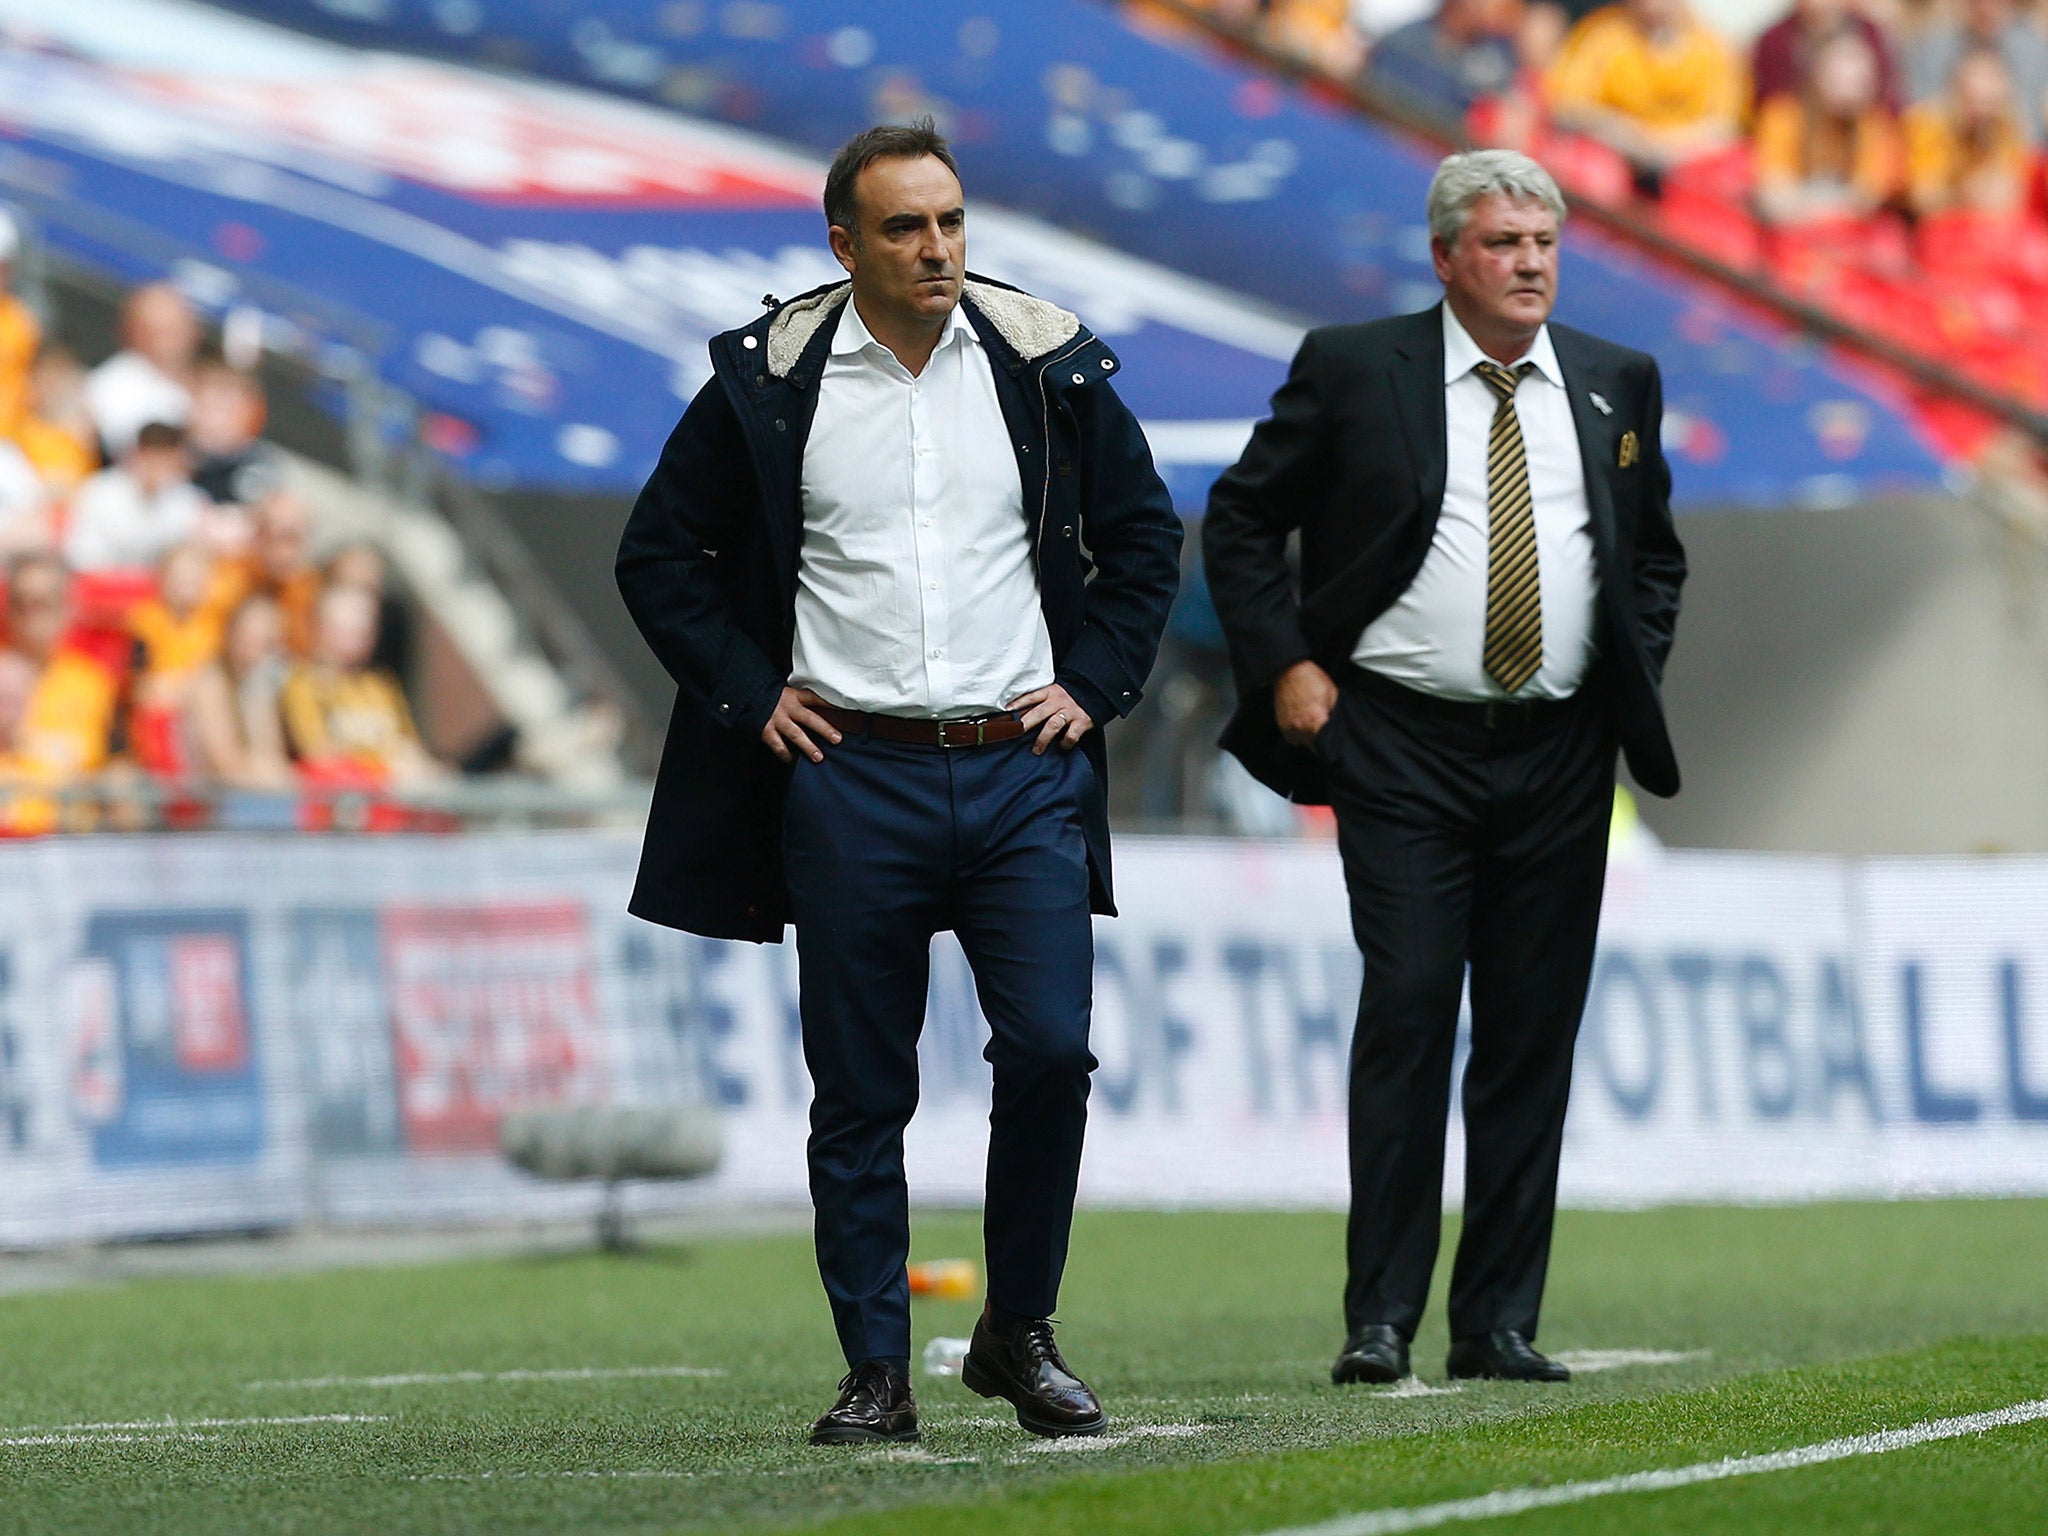 &#13;
Sheffield Wednesday manager Carlos Carvalhal and Hull's Steve Bruce &#13;